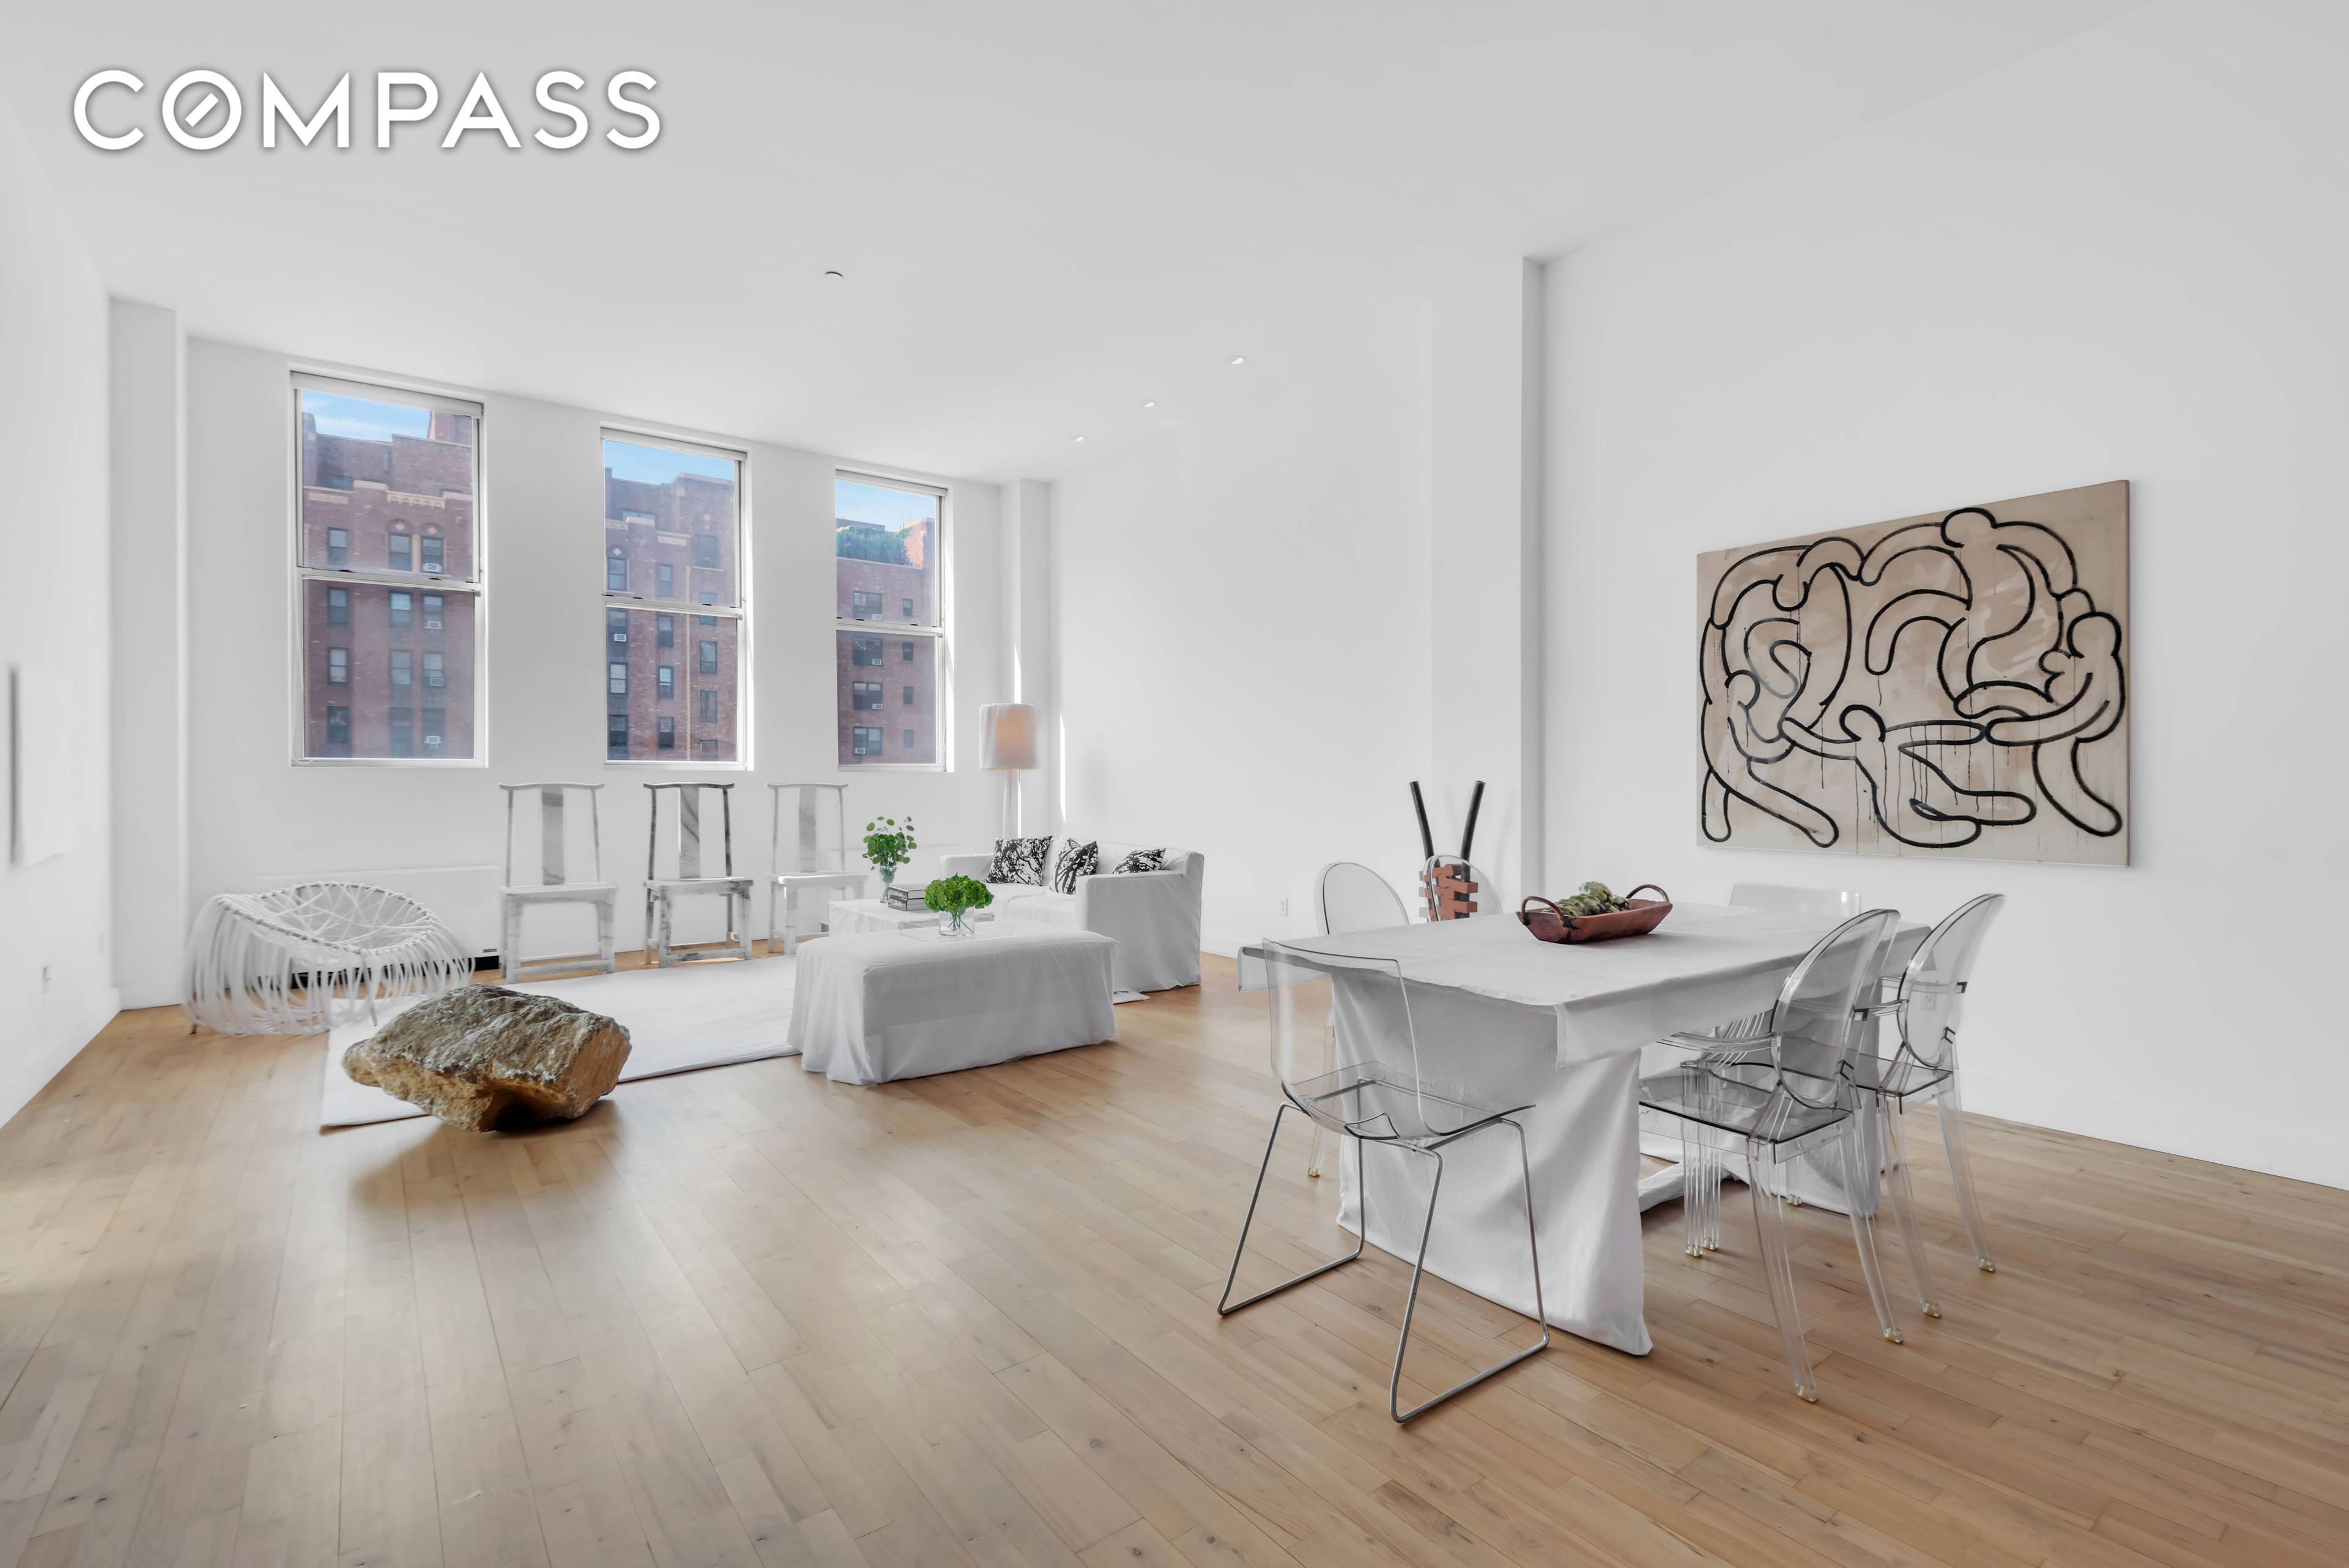 Welcome to the ultimate artist loft apartment at Loft 25.